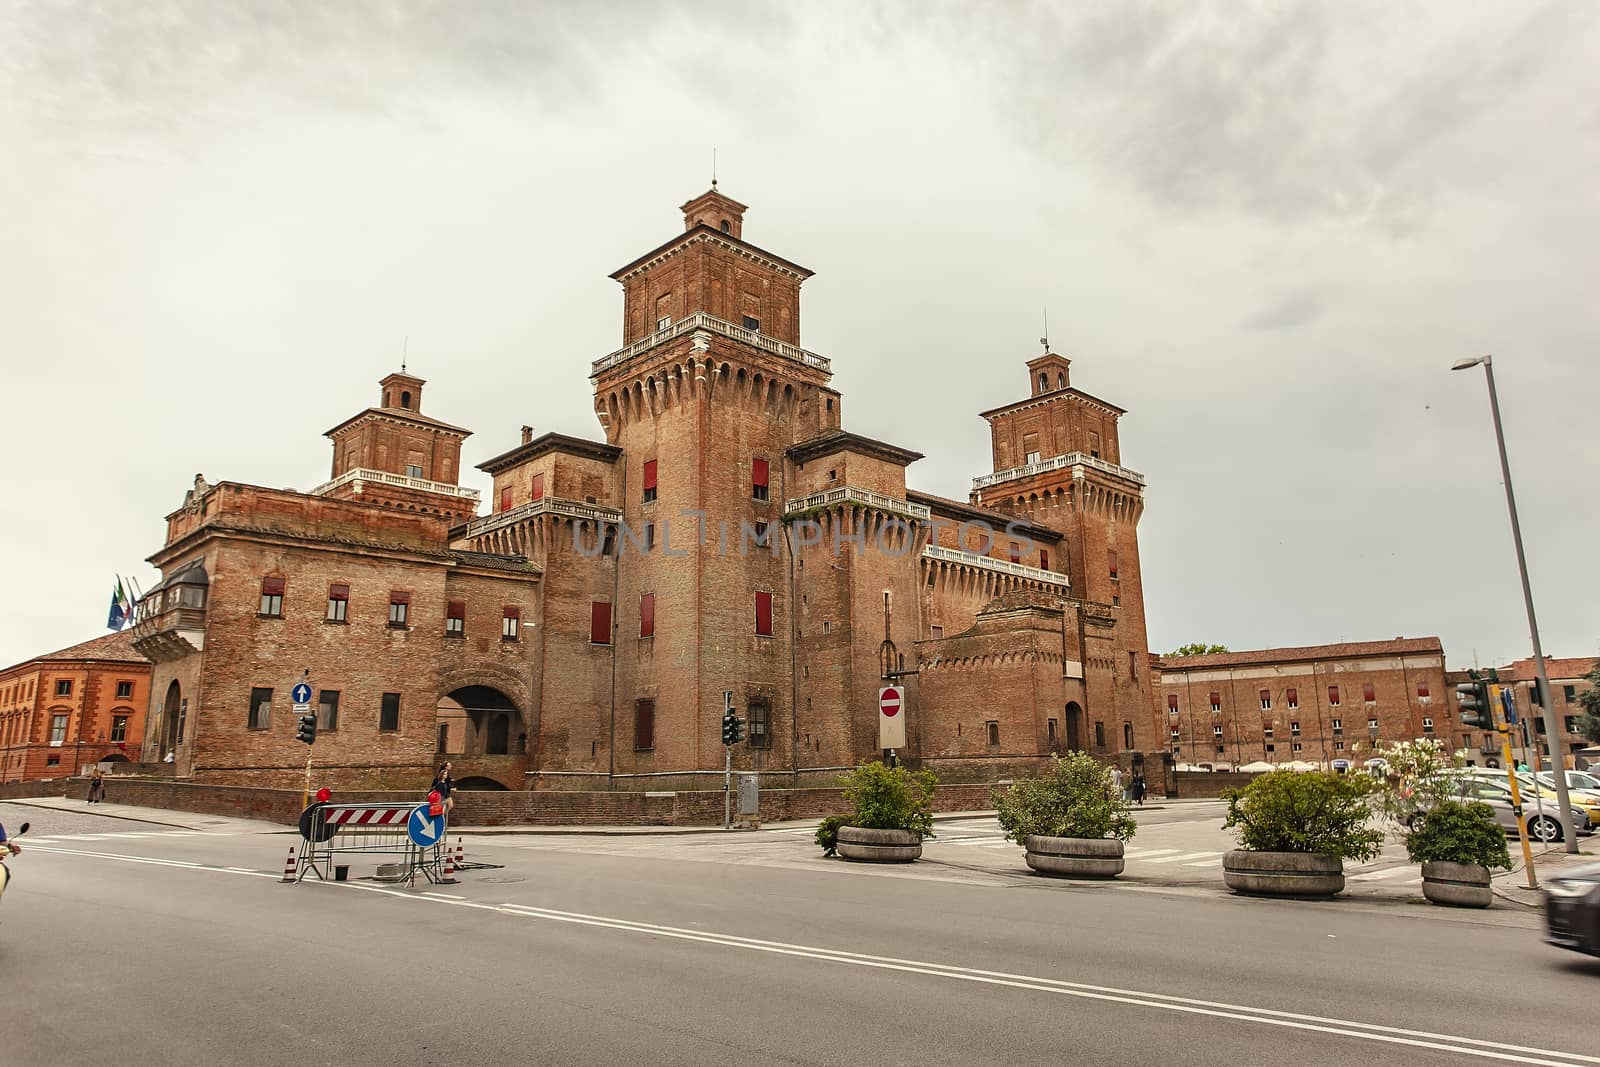 Medieval castle of Ferrara the historical Italian city 14 by pippocarlot